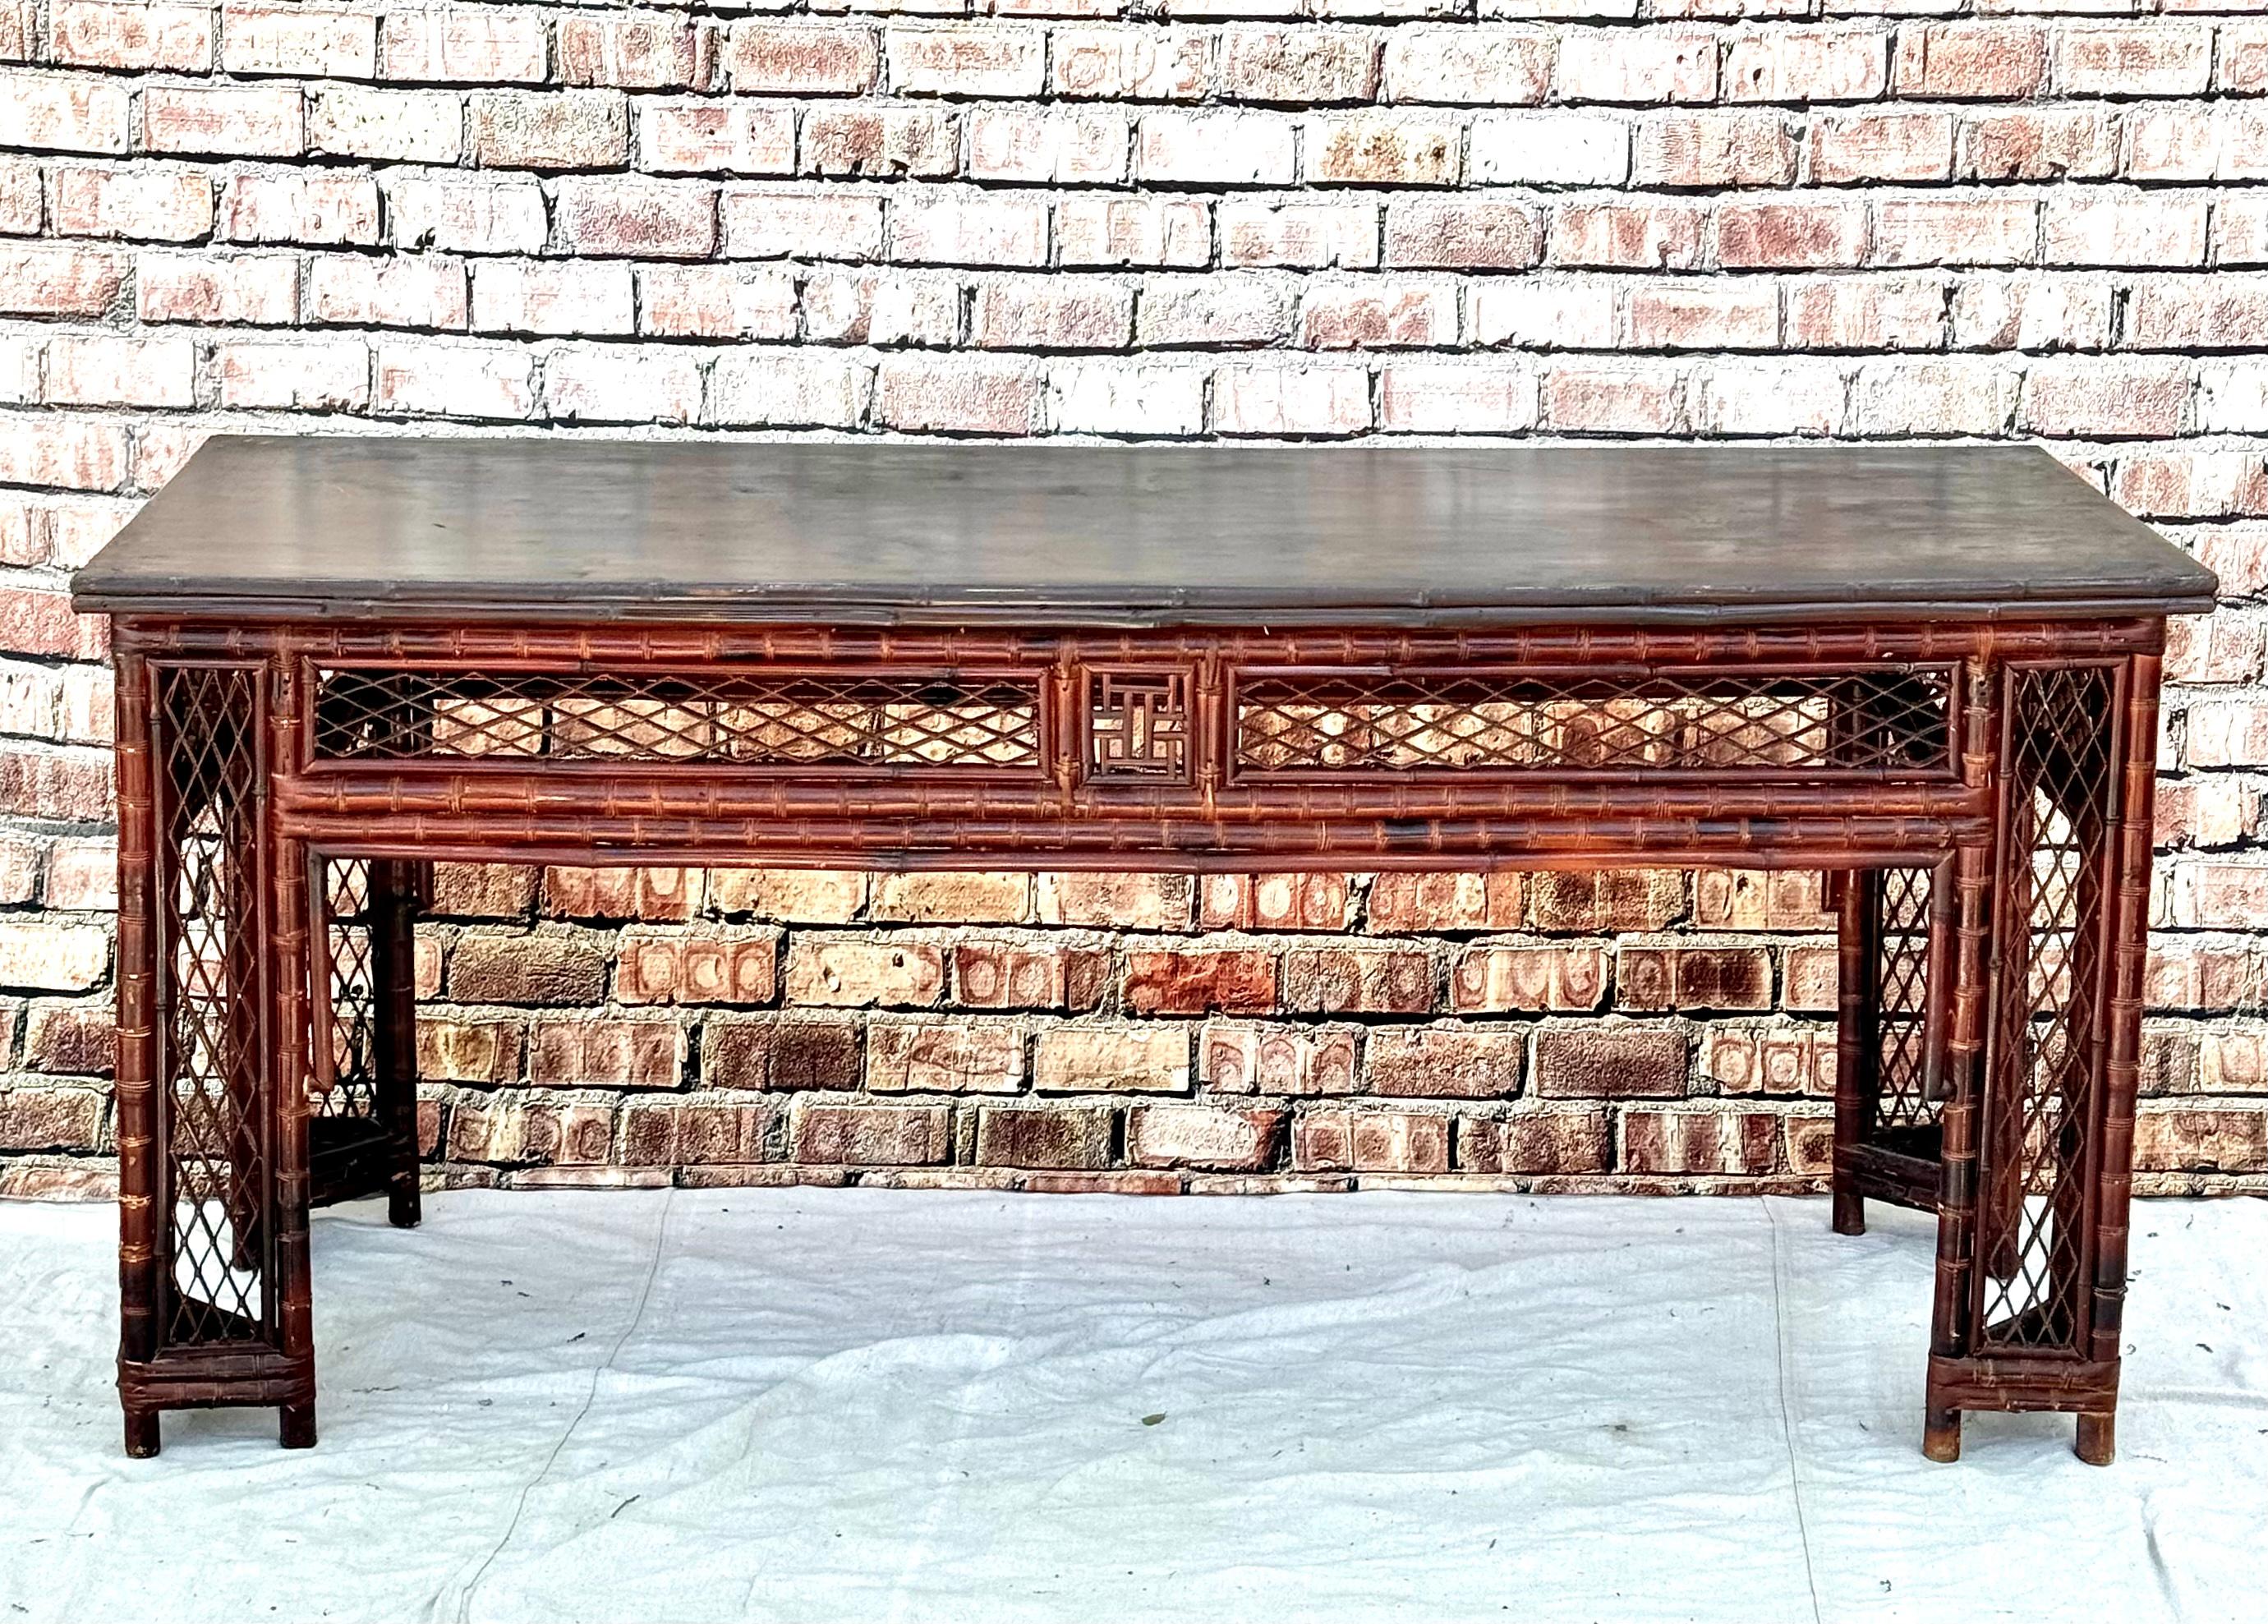 19th Century Chinese bamboo library table. Amazing Chinese export center or library table featuring intricate bamboo open fretwork on the aprons. The black wood table top is supported by bamboo fretwork legs. Beautifully crafted with Asian motif